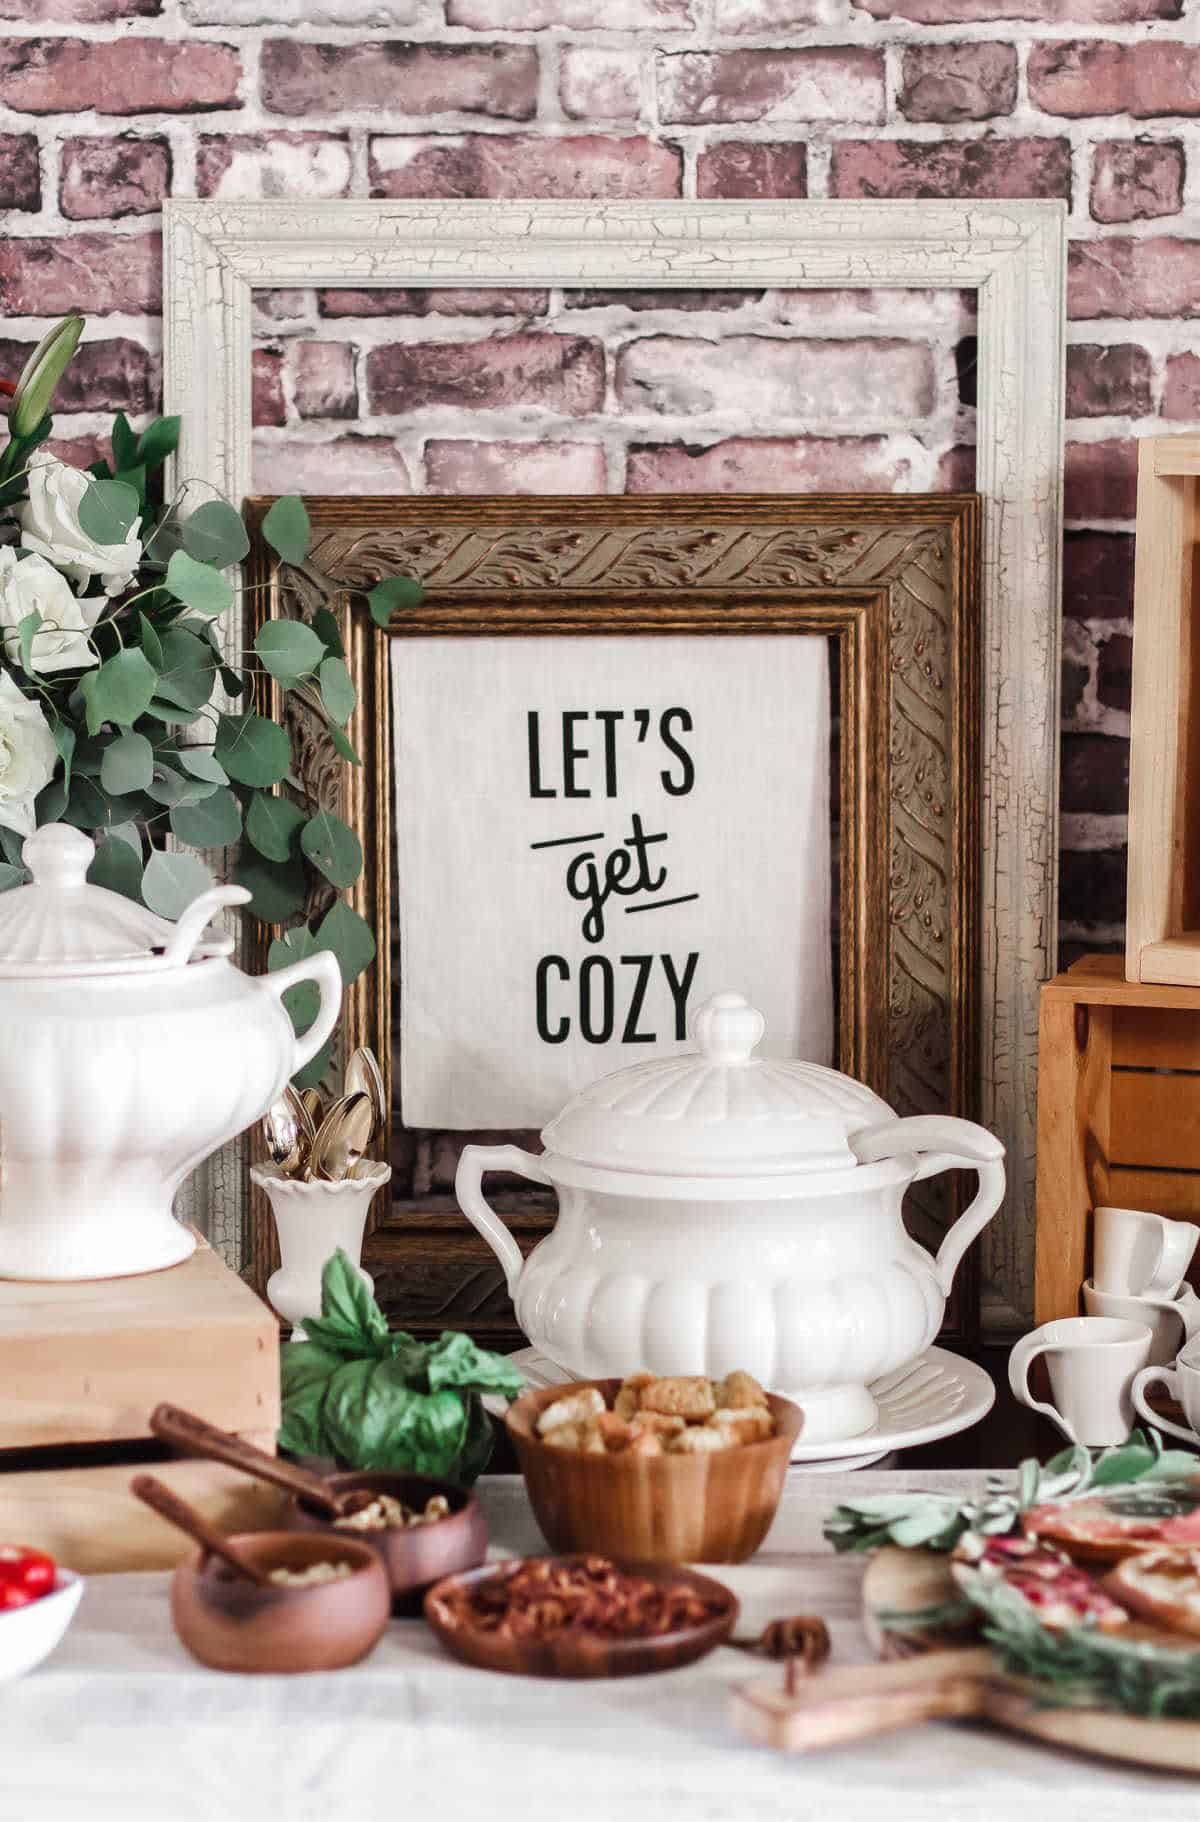 food buffet with tureens and "lets get cozy" sign